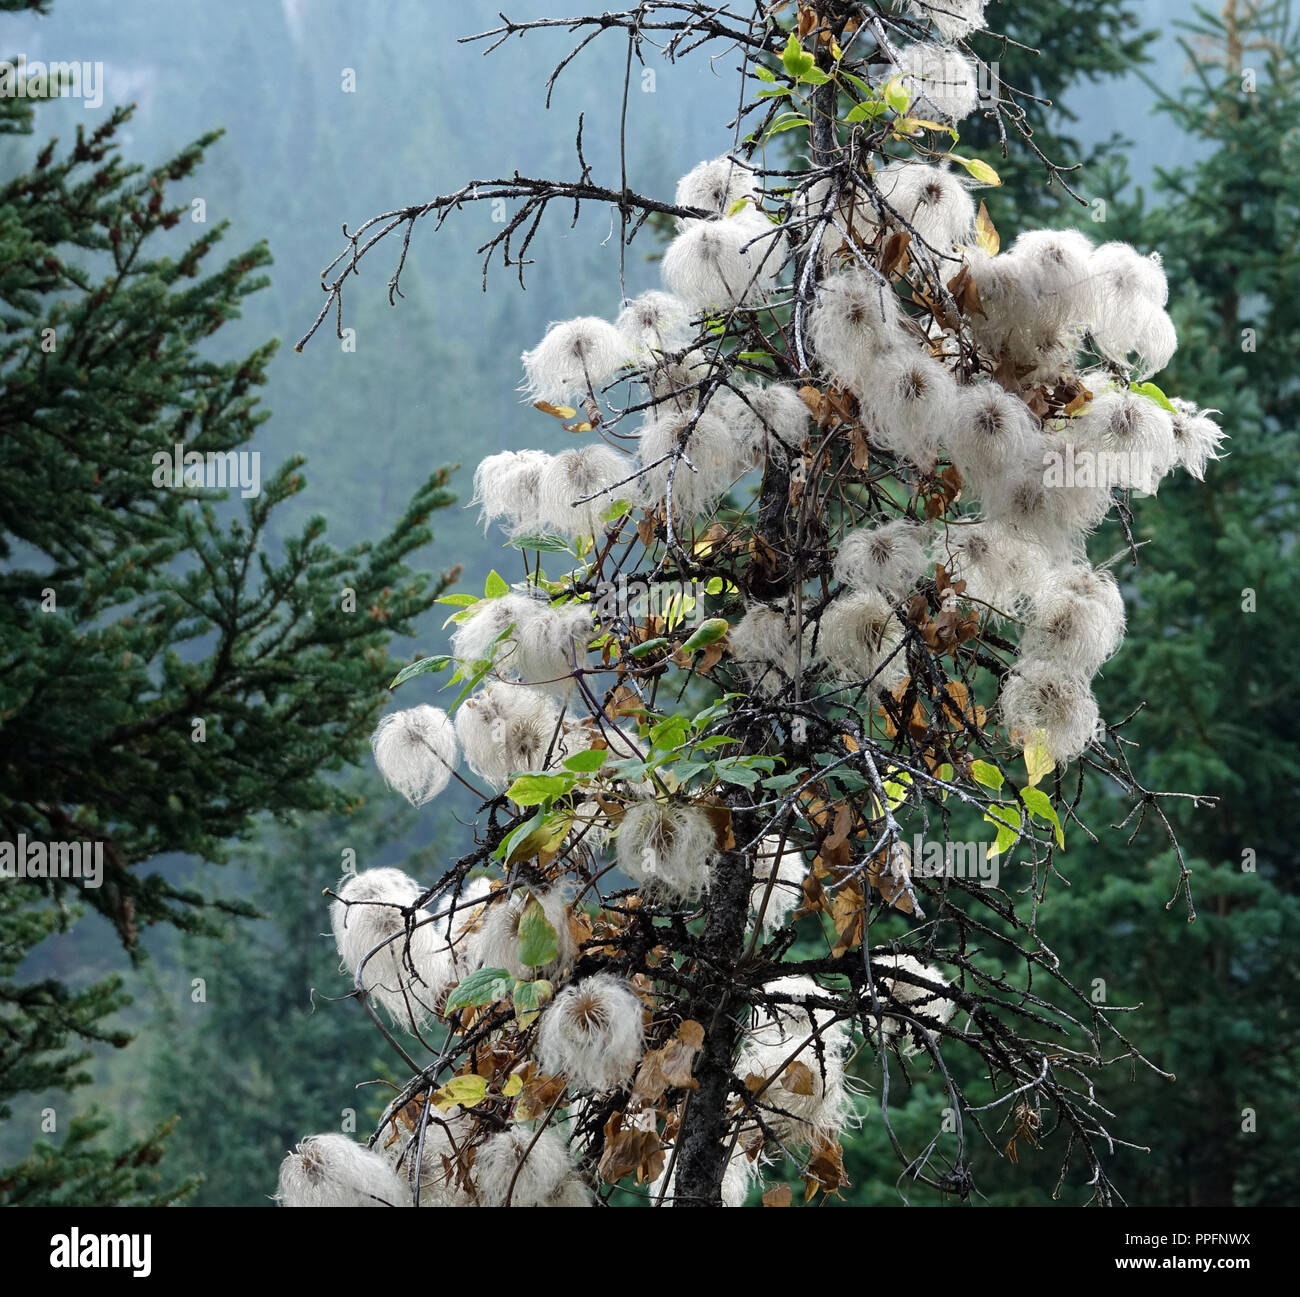 white cotton ball like clusters on tree Stock Photo - Alamy